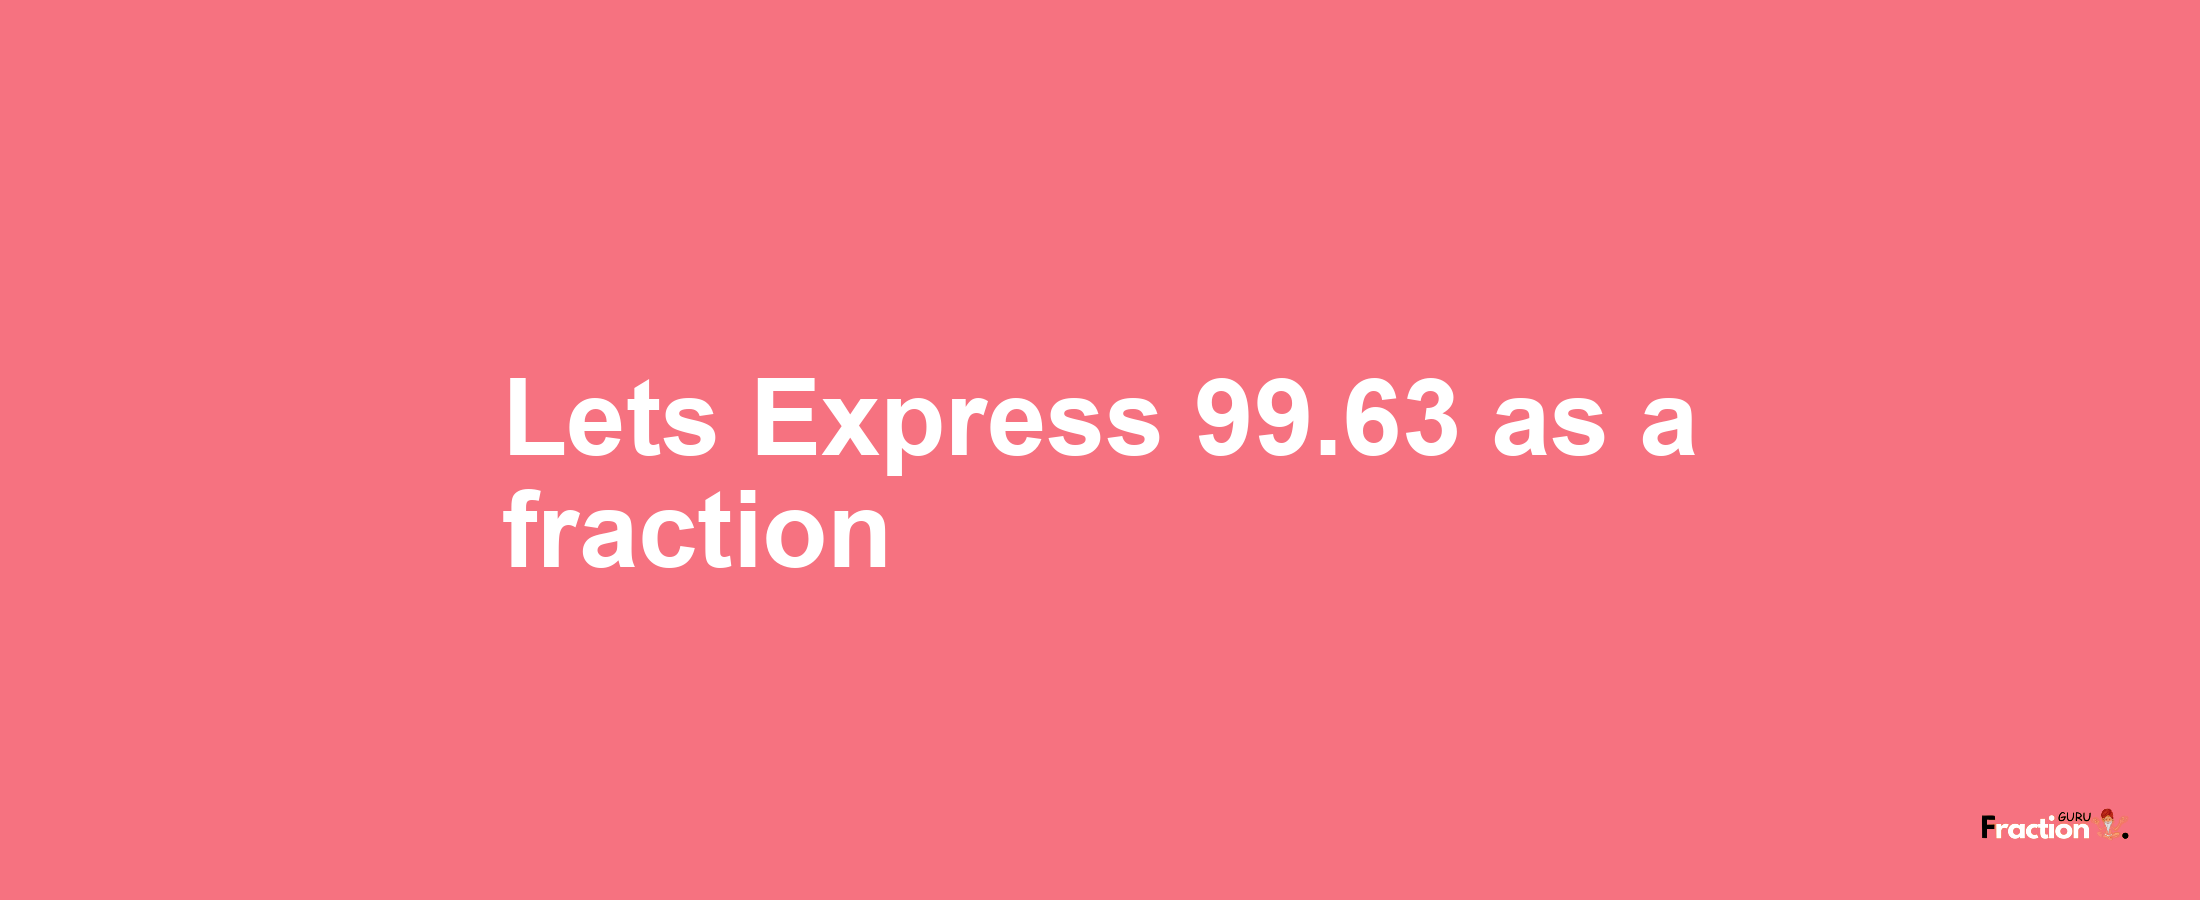 Lets Express 99.63 as afraction